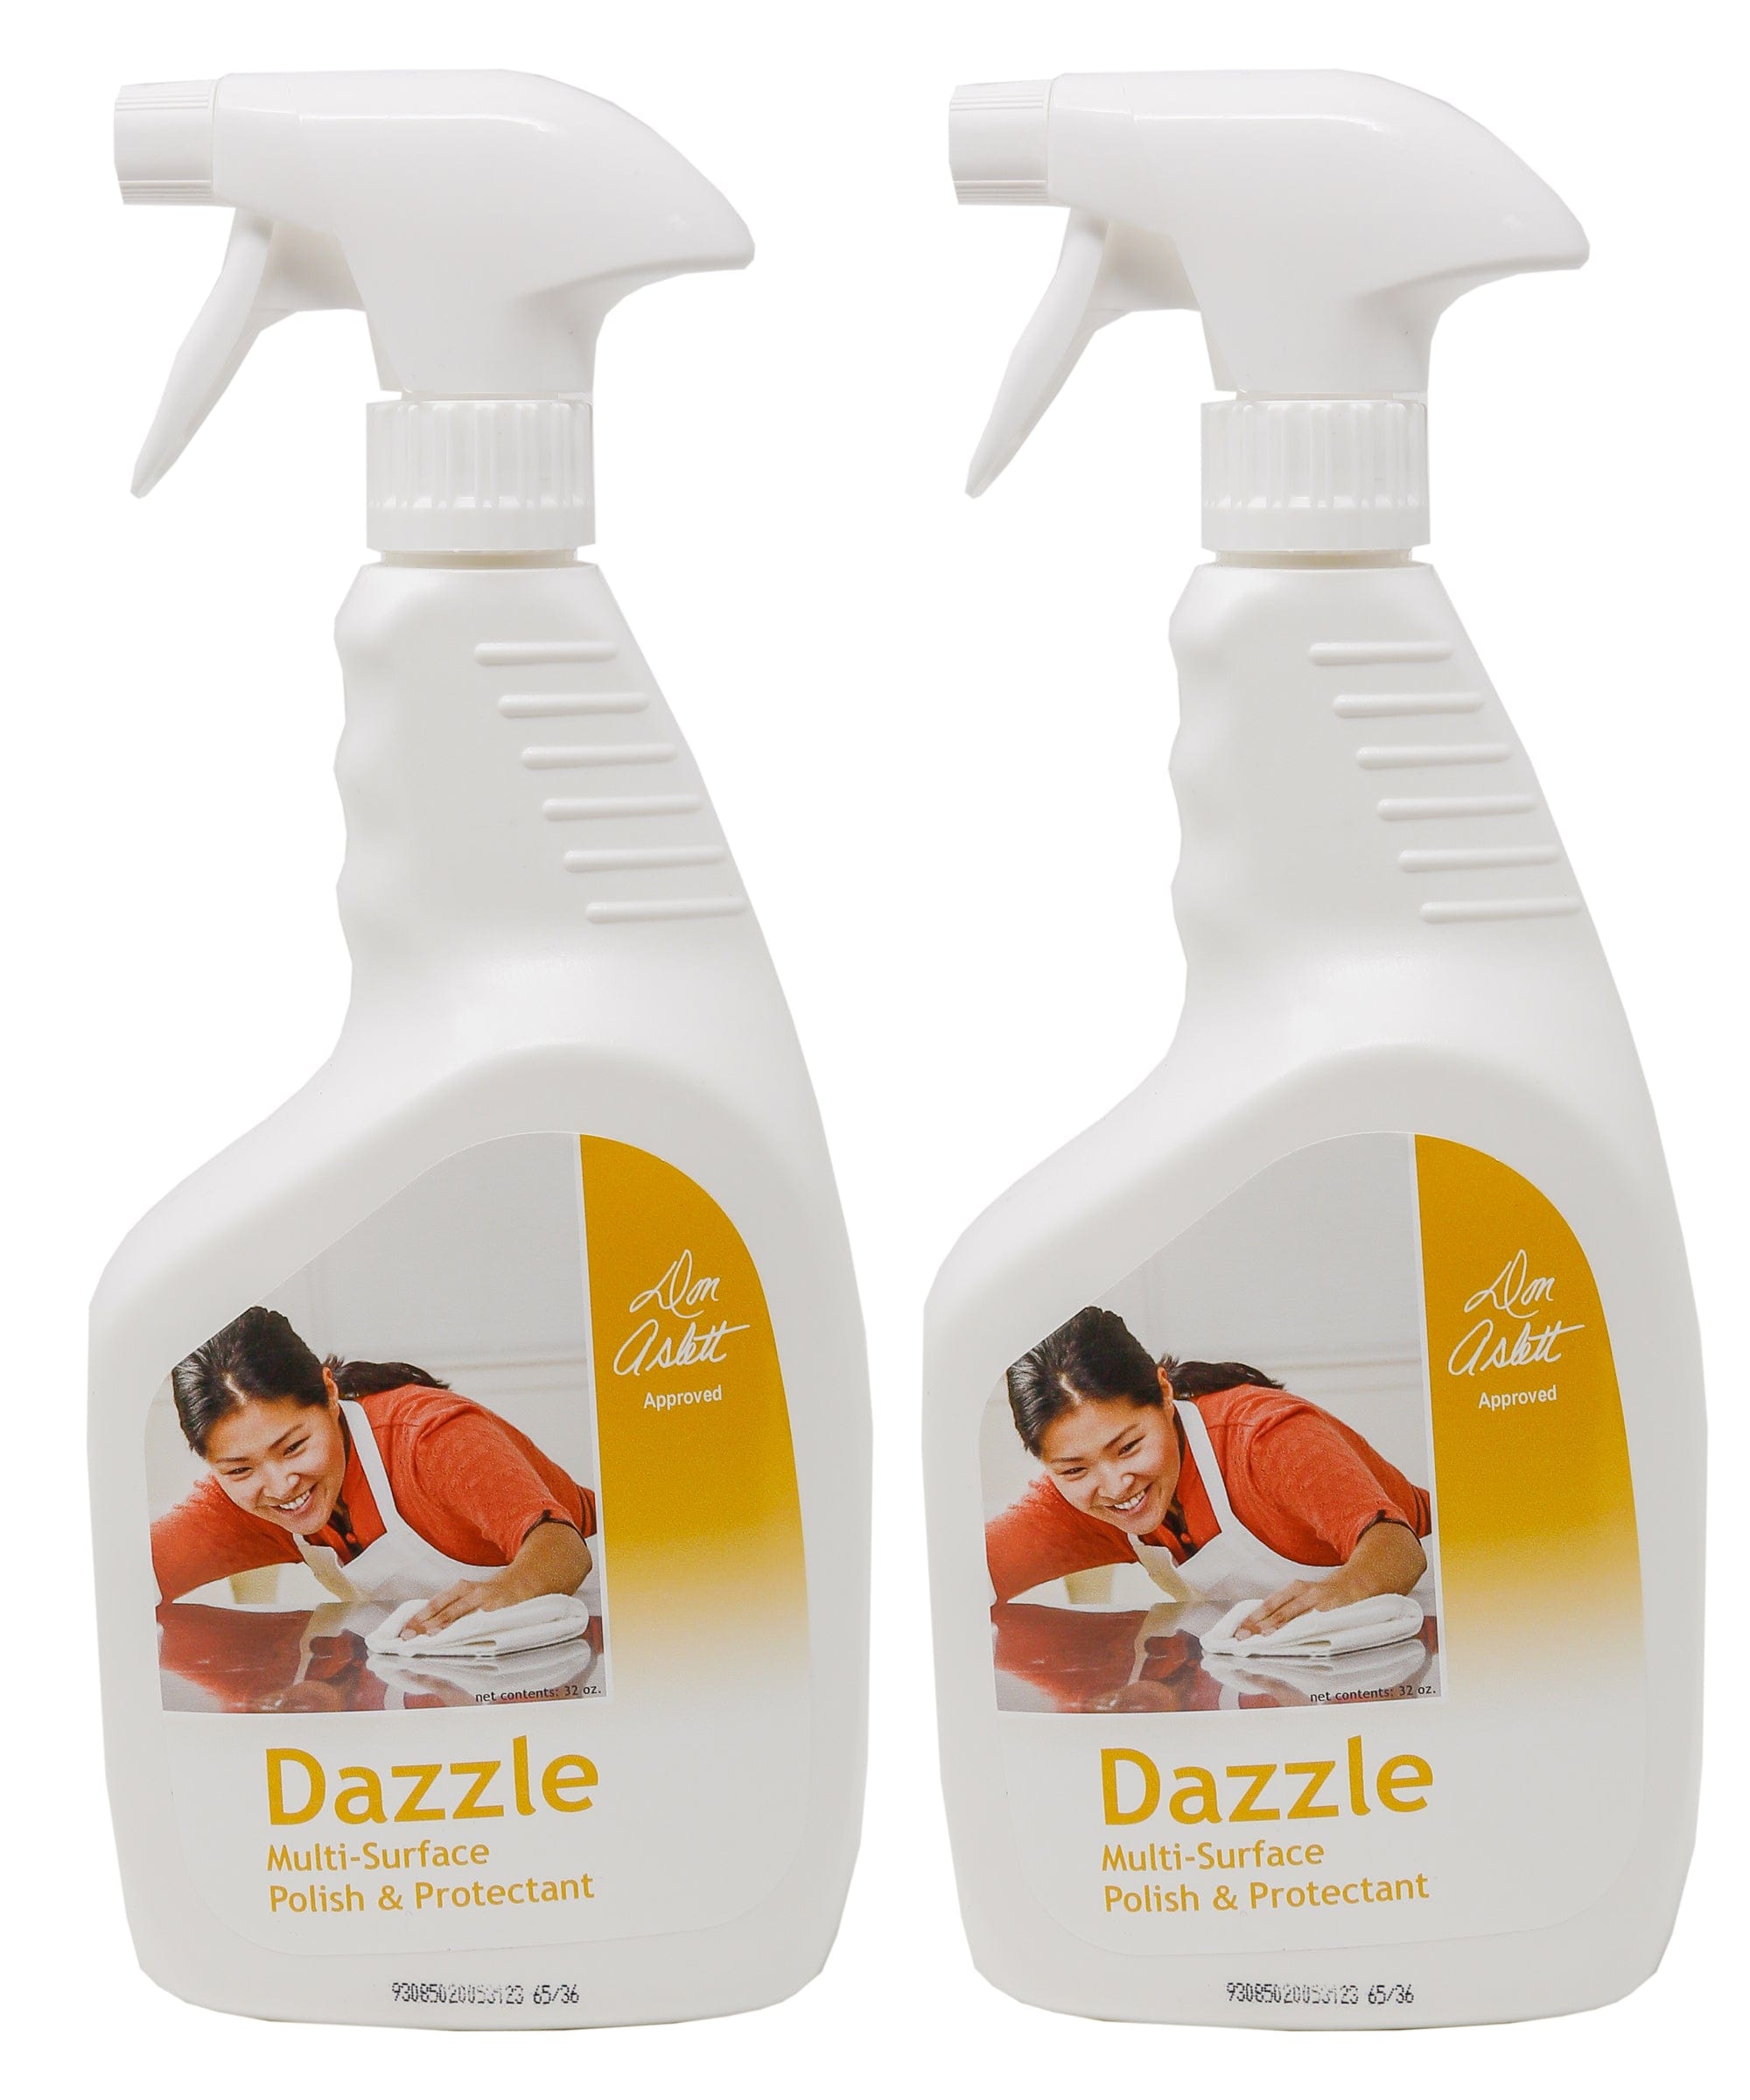 Don Aslett Dazzle-2 Pack